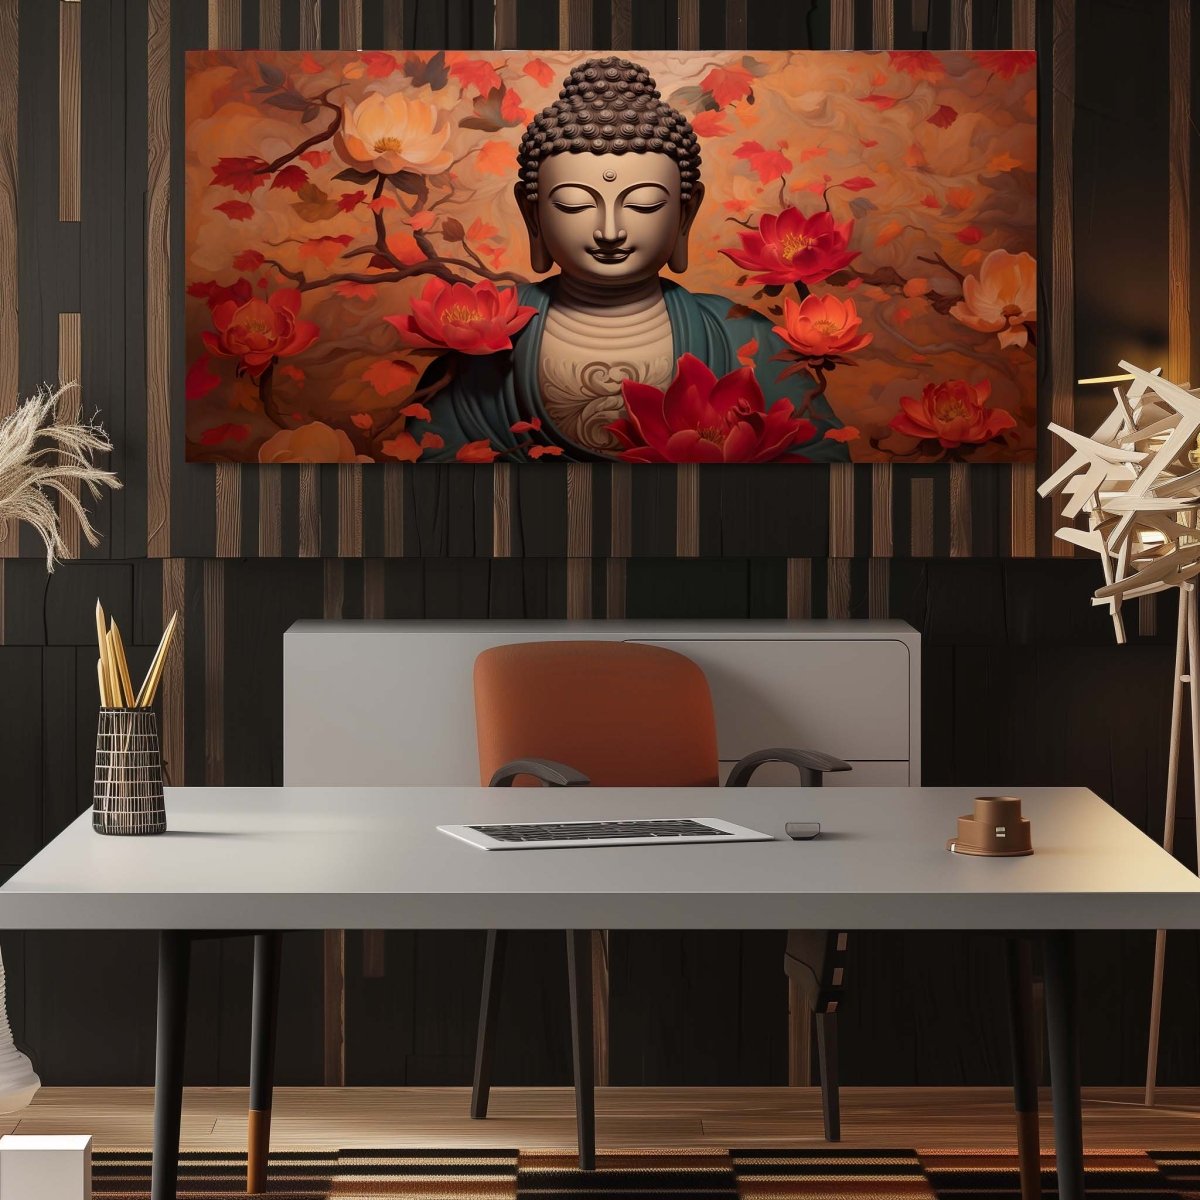 The Buddha's Smile in Red Bloom (48 x 27 Inches )